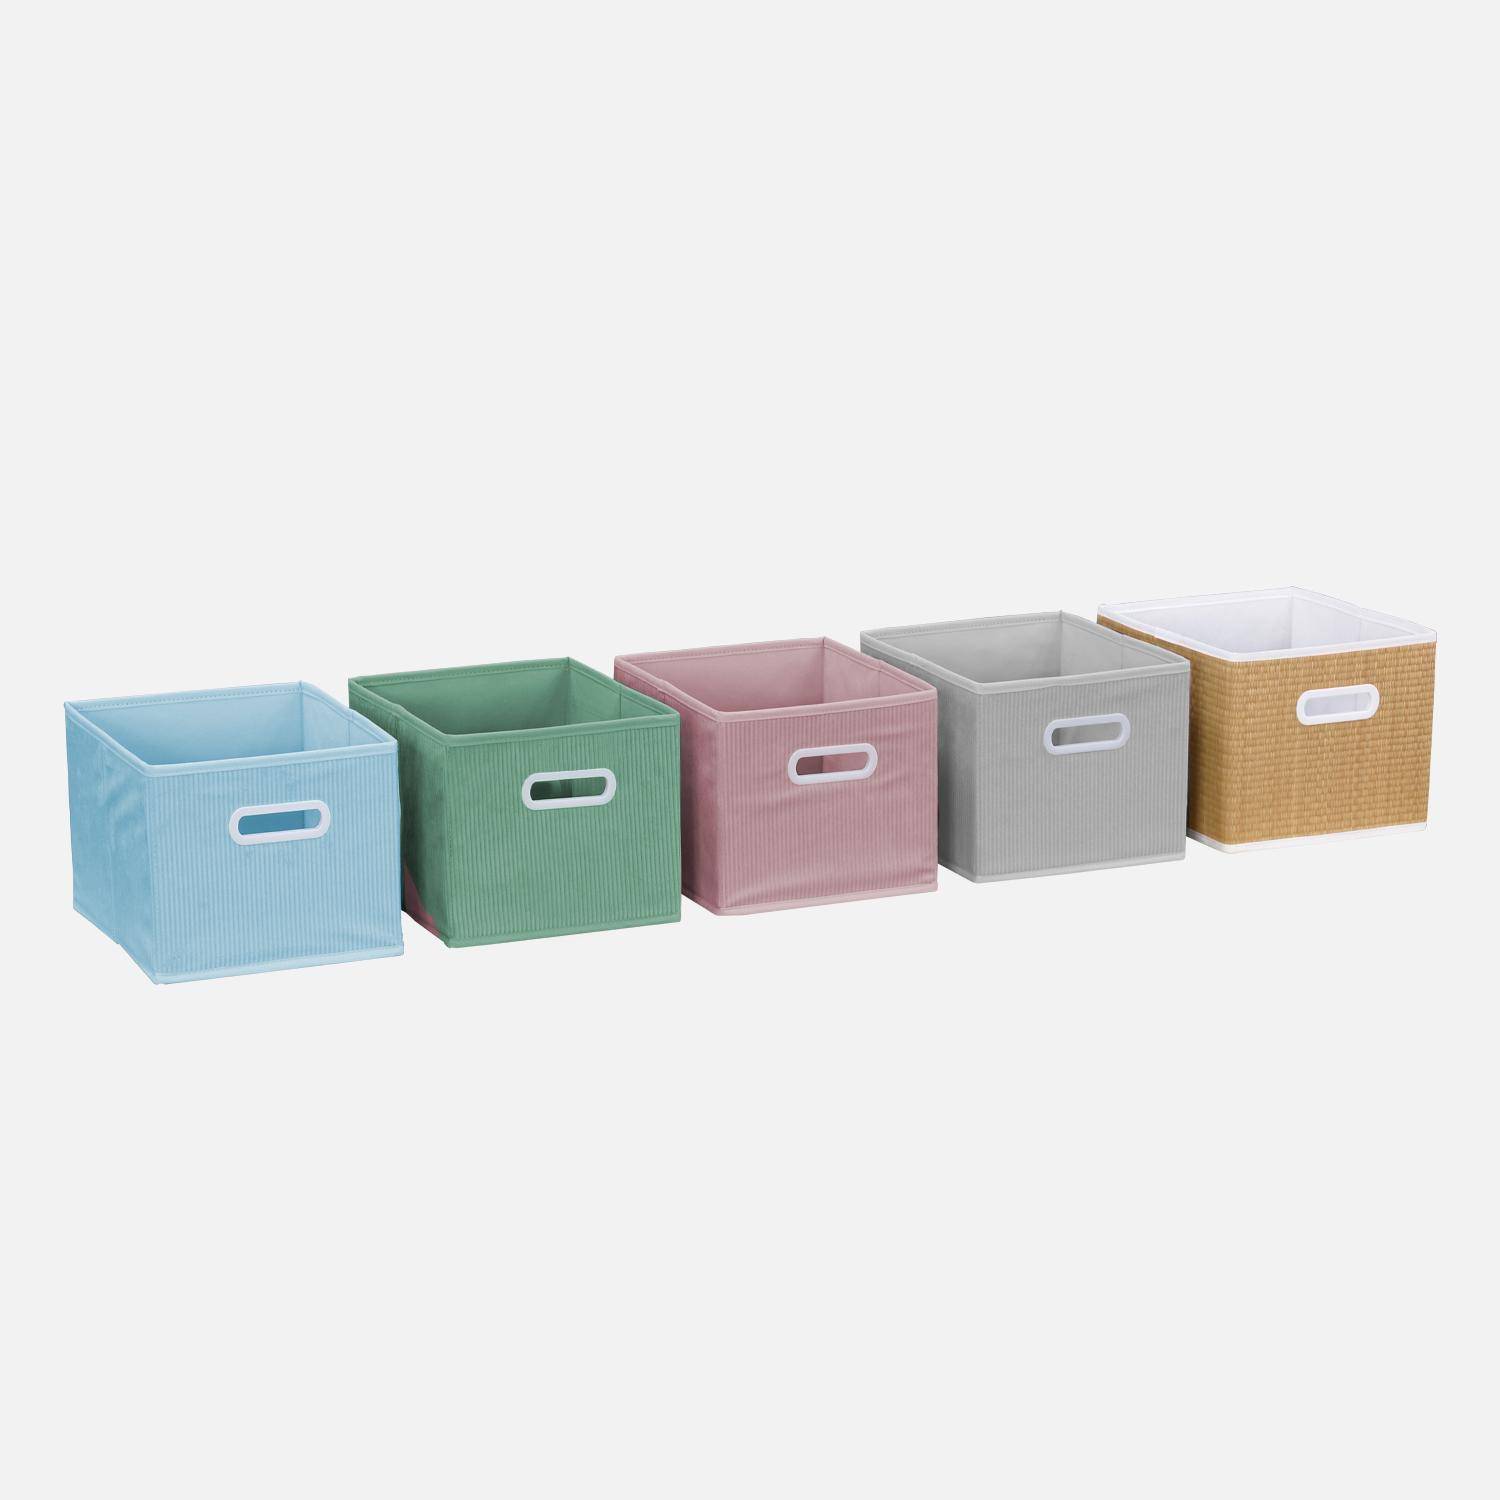 Storage unit for children with 7 compartments and 4 natural fibre baskets,sweeek,Photo4